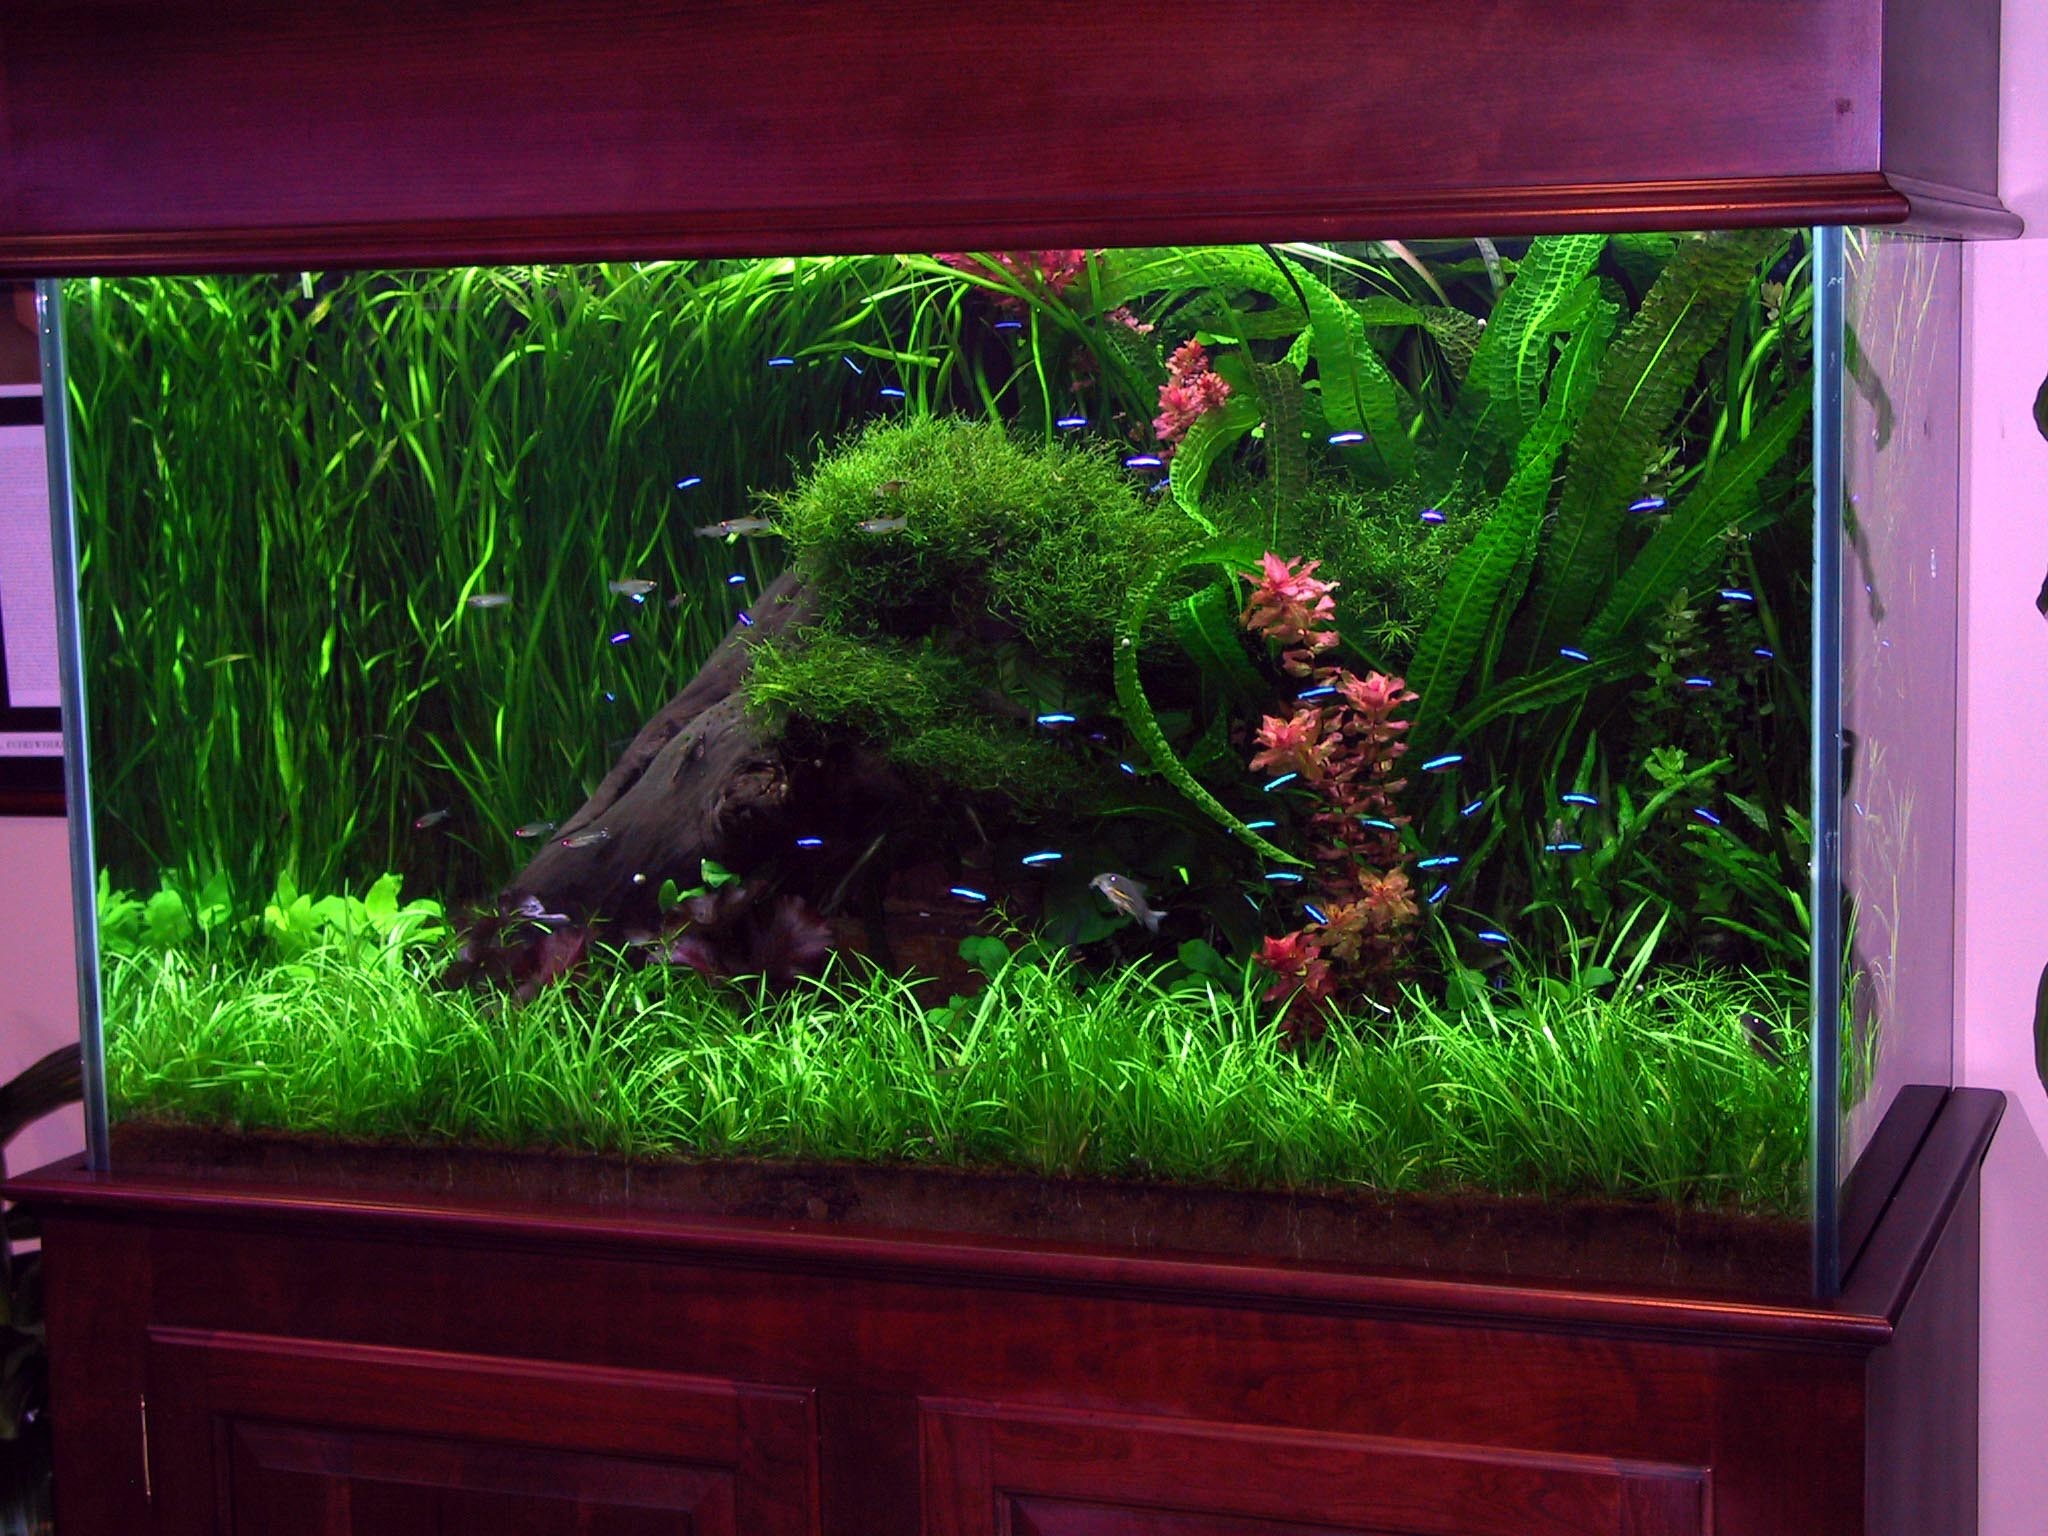 2048x1536 Full Size of Fish Tank Can Betta Fish In Tank With Other Cycling Food  Artificial Tanks ...